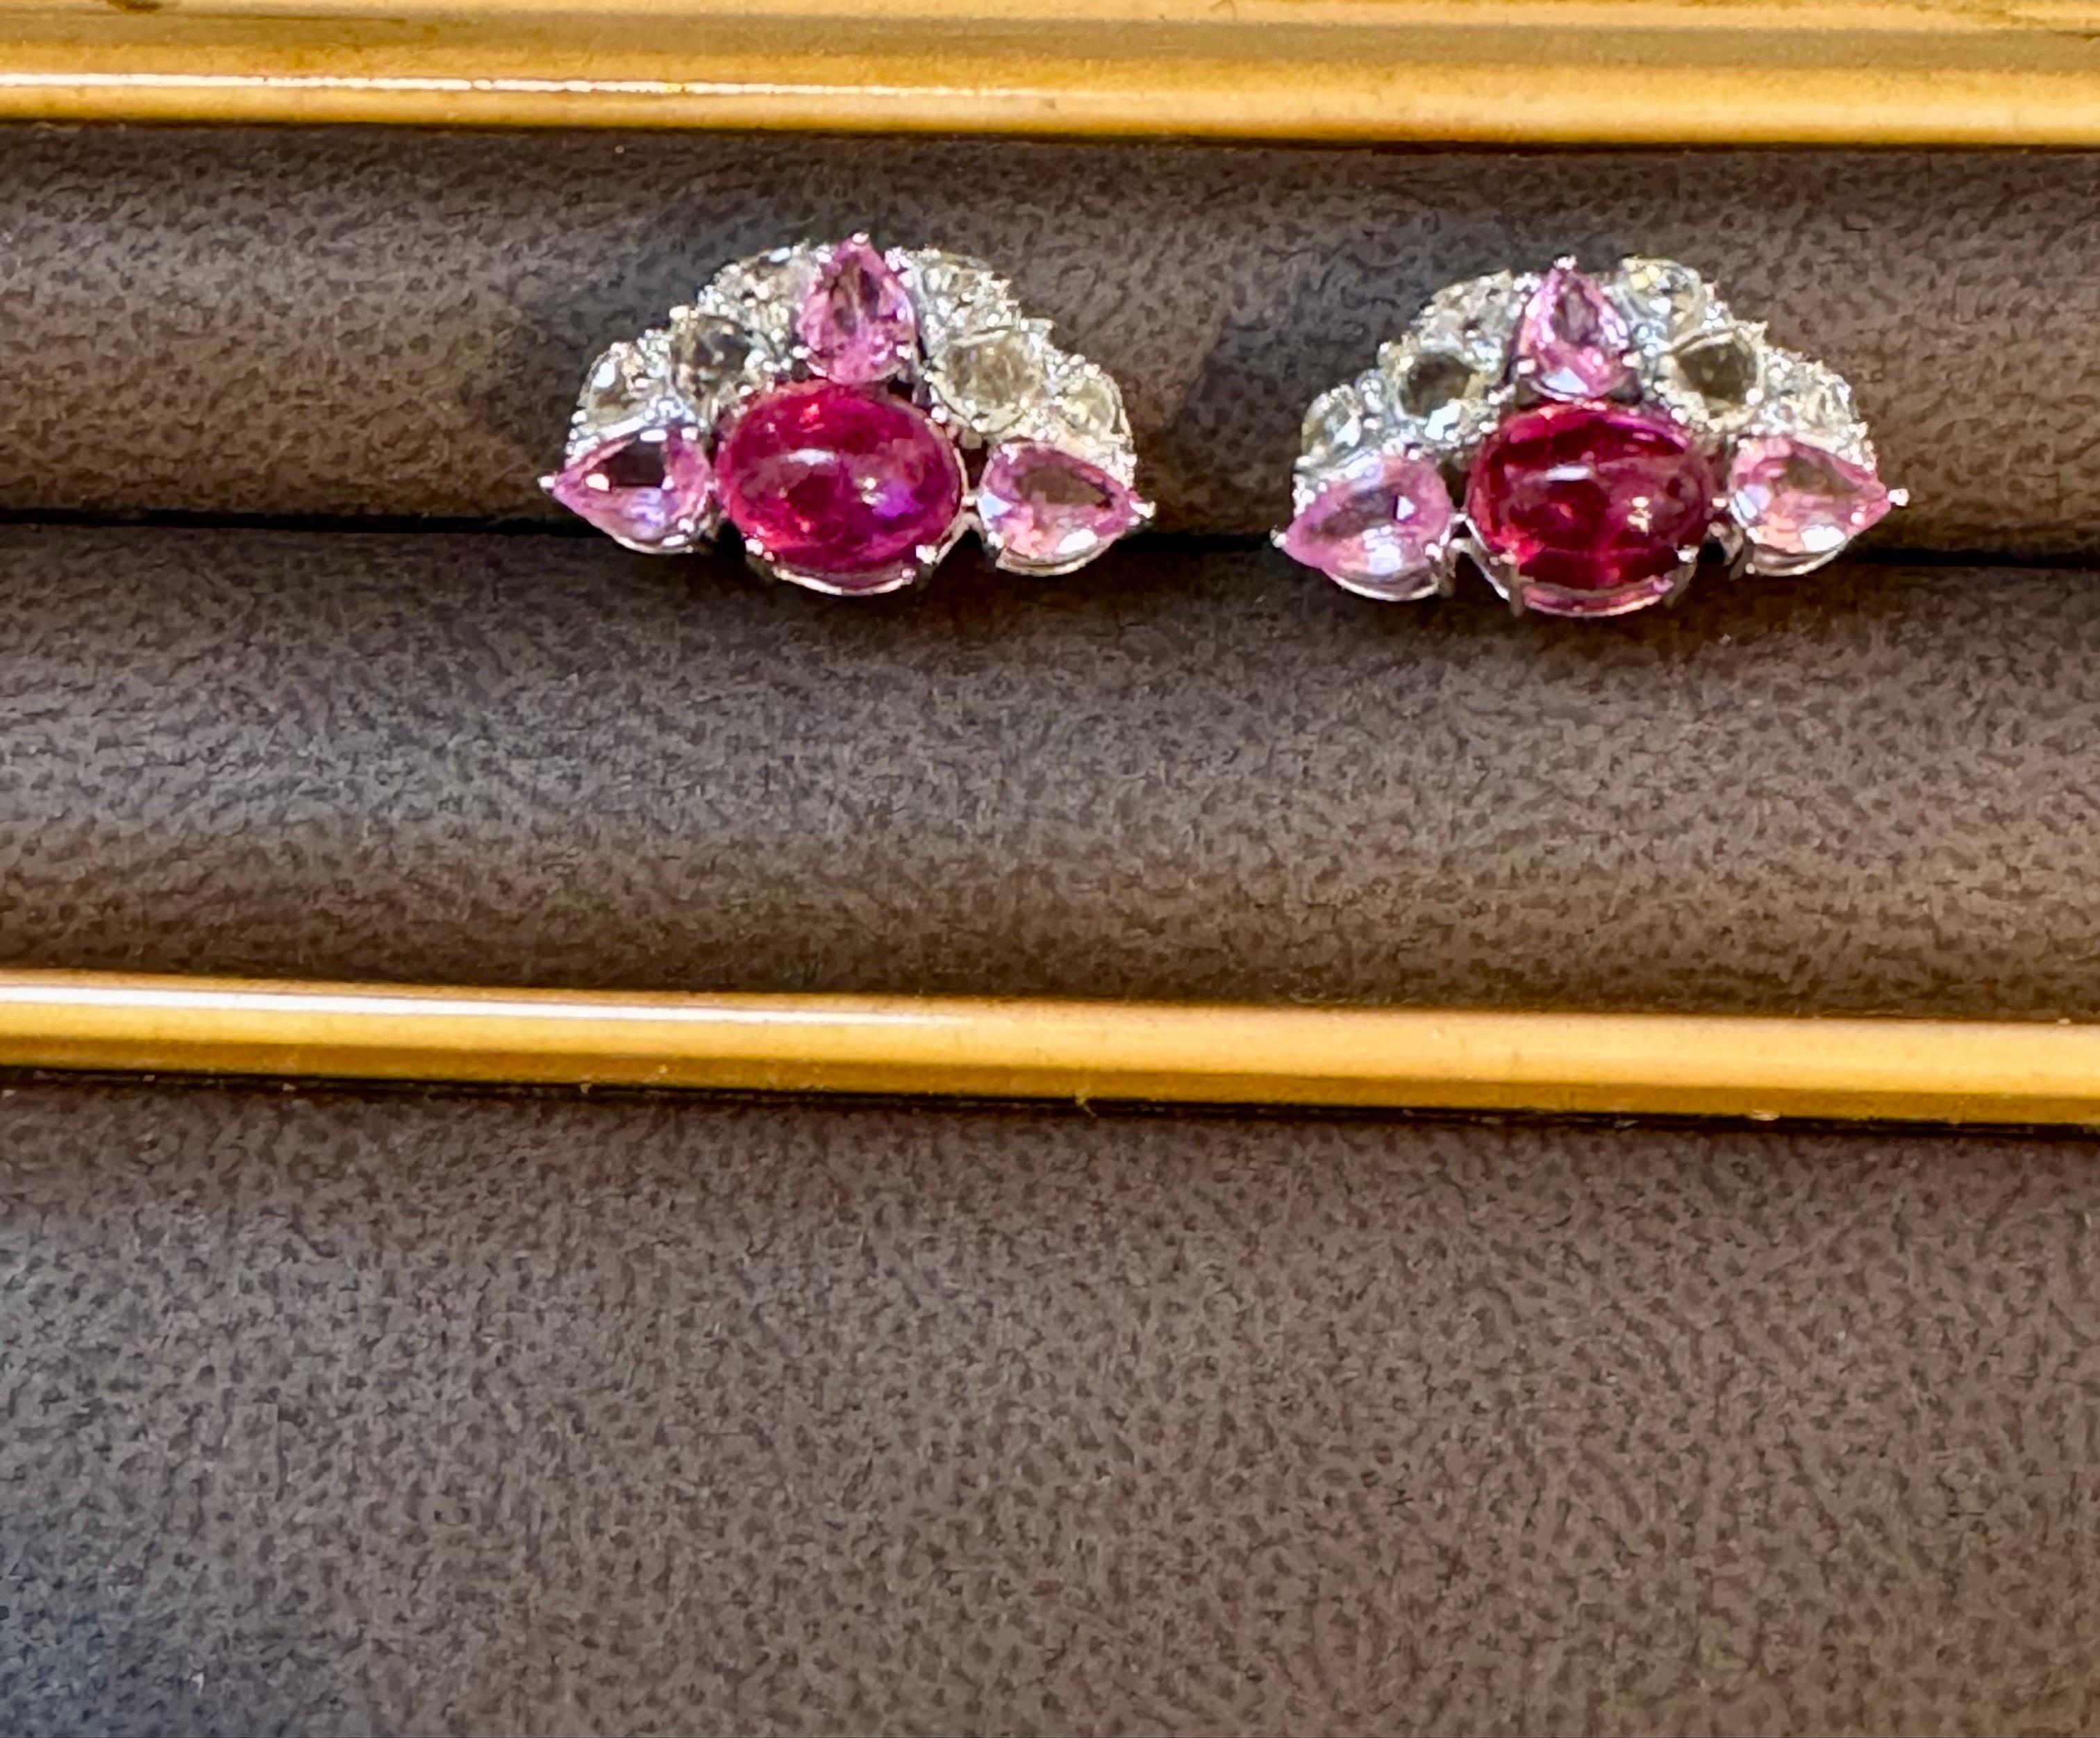 Pink Tourmaline and Pink Sapphire Earrings with Rose Cut Diamonds 18 Karat Gold For Sale 2